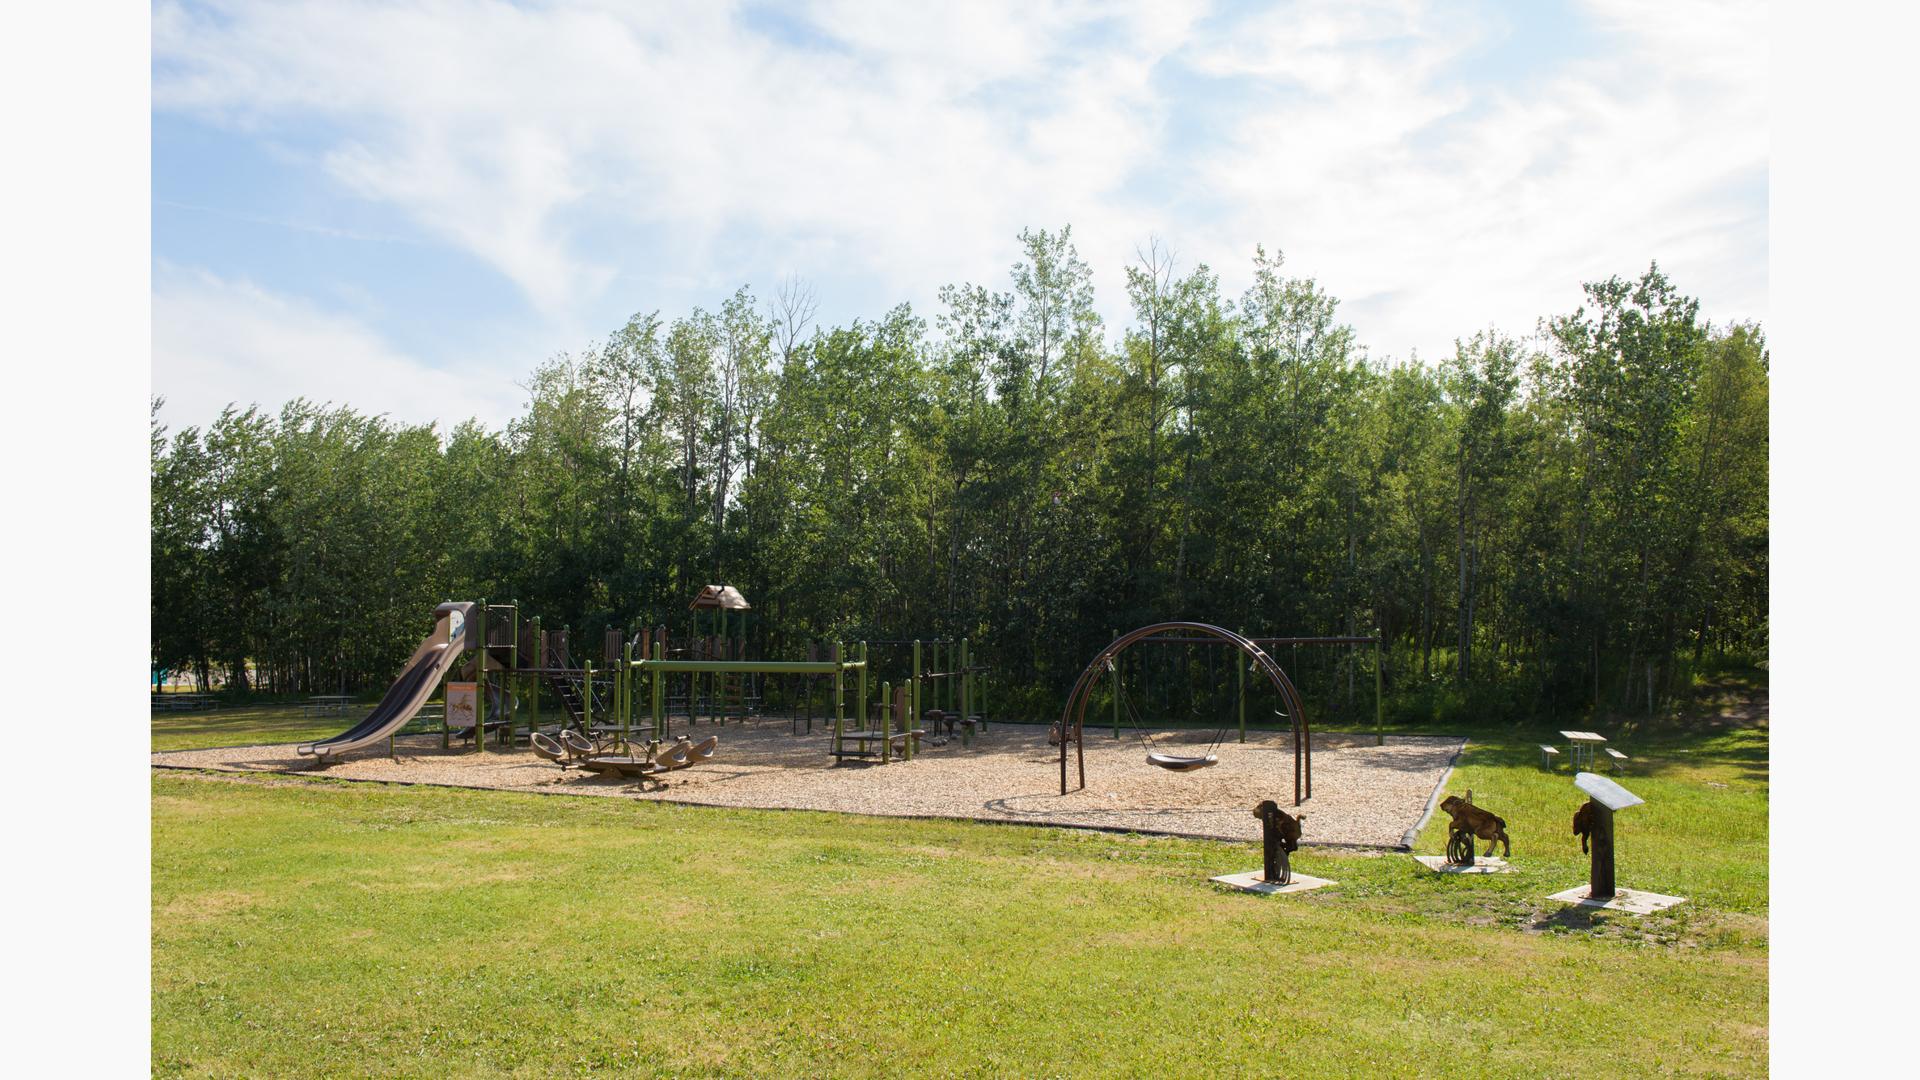 A nature-inspired playground with tall slides and swings surrounded by trees